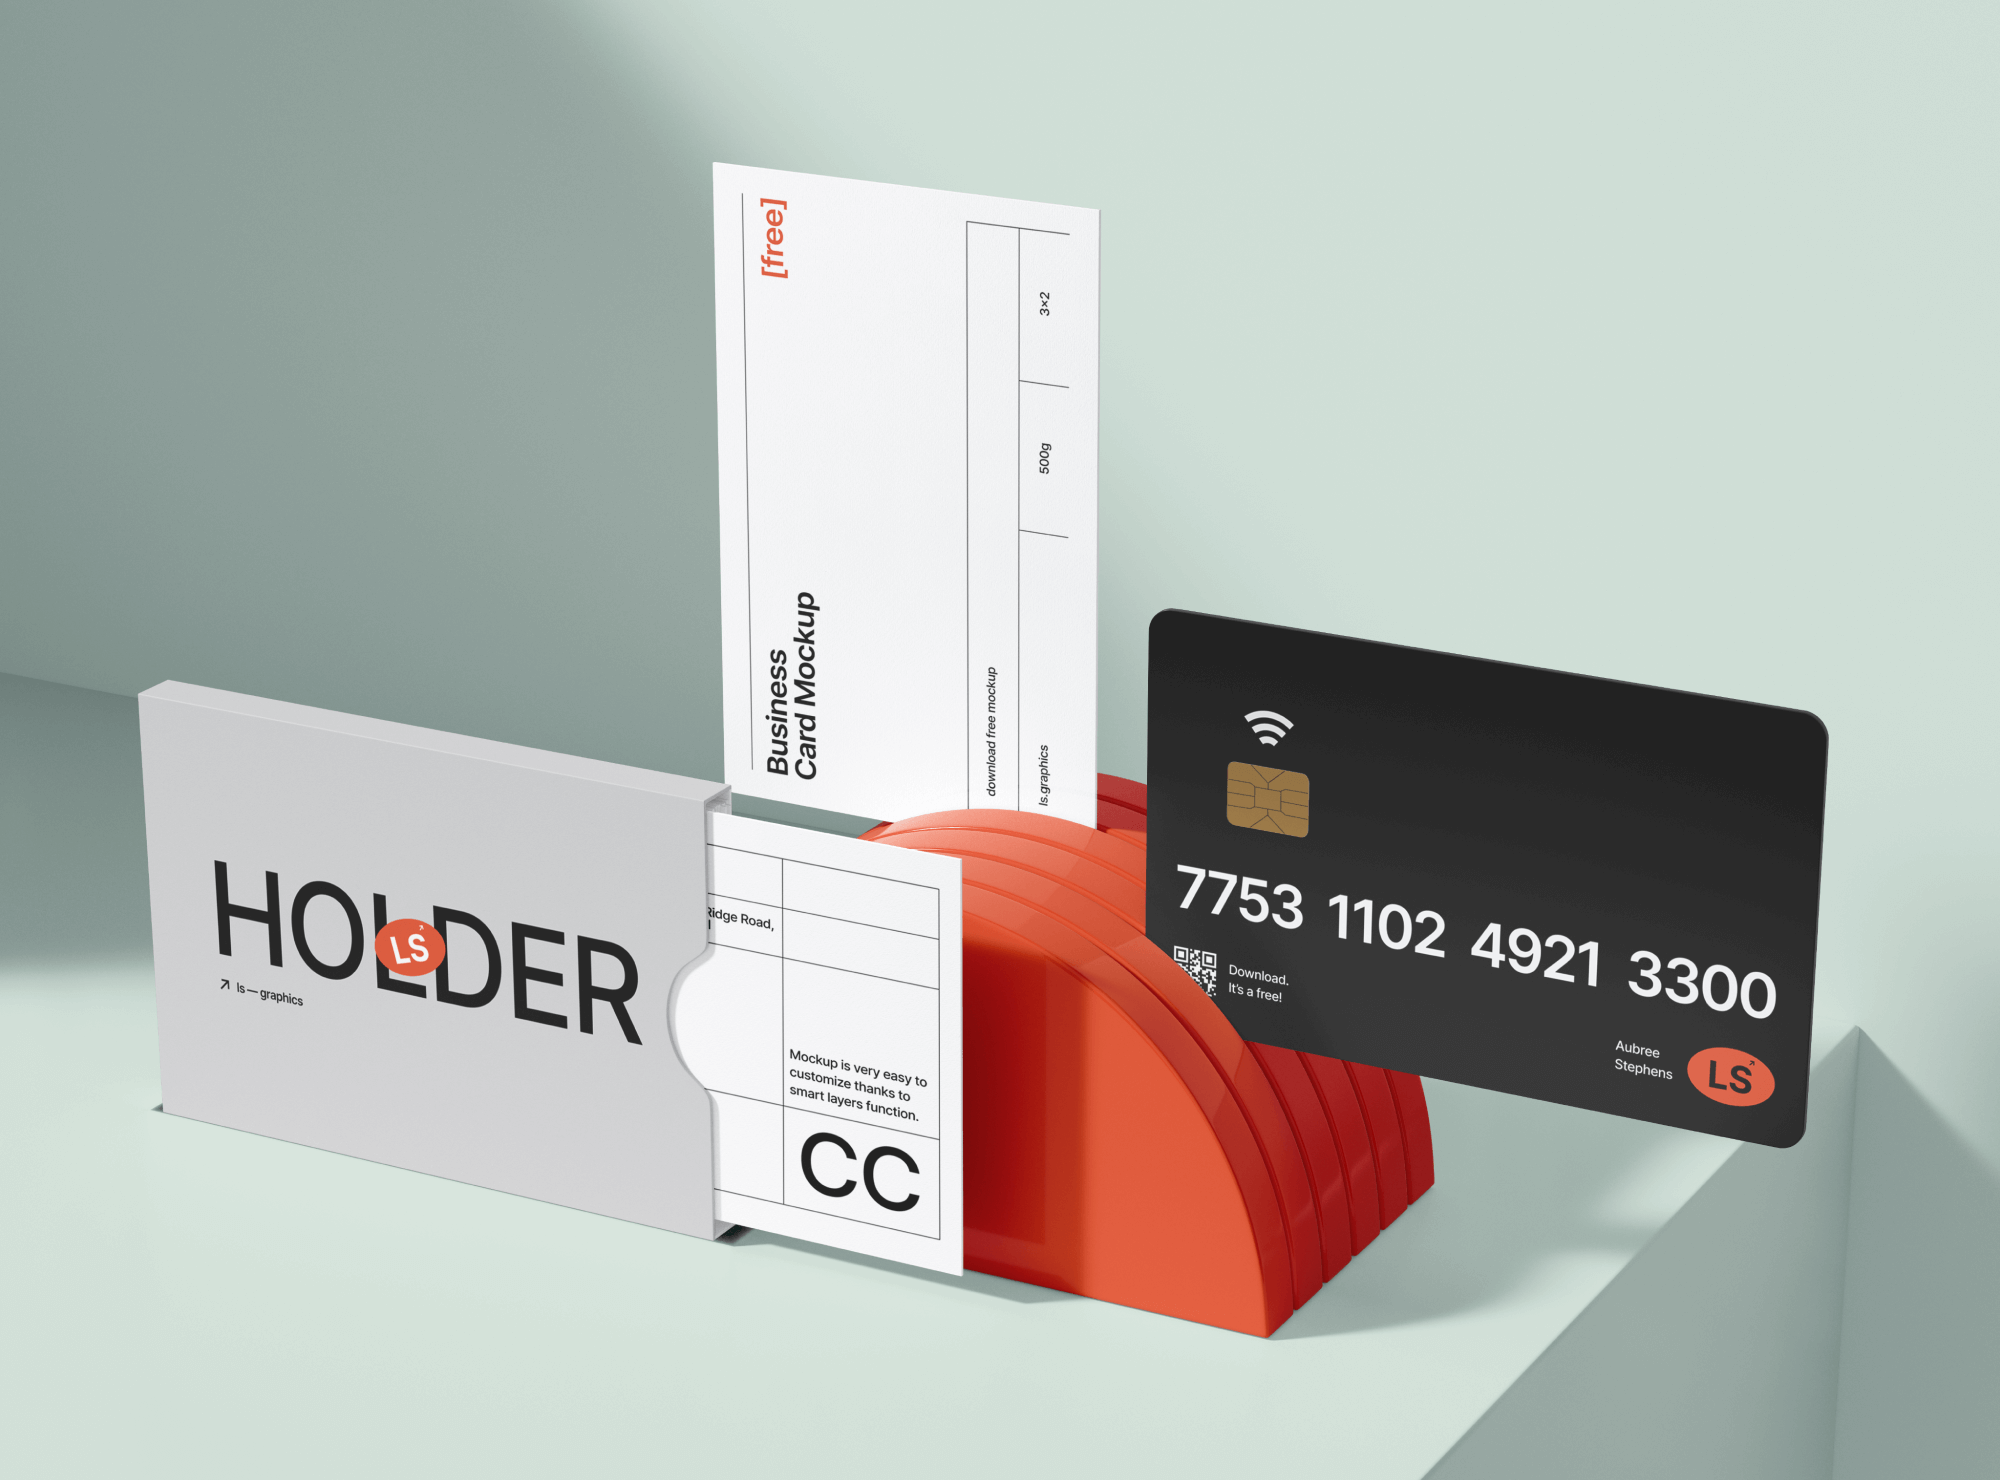 A rendered high-quality cardholder mockup showcasing business and bank cards on a customizable background.